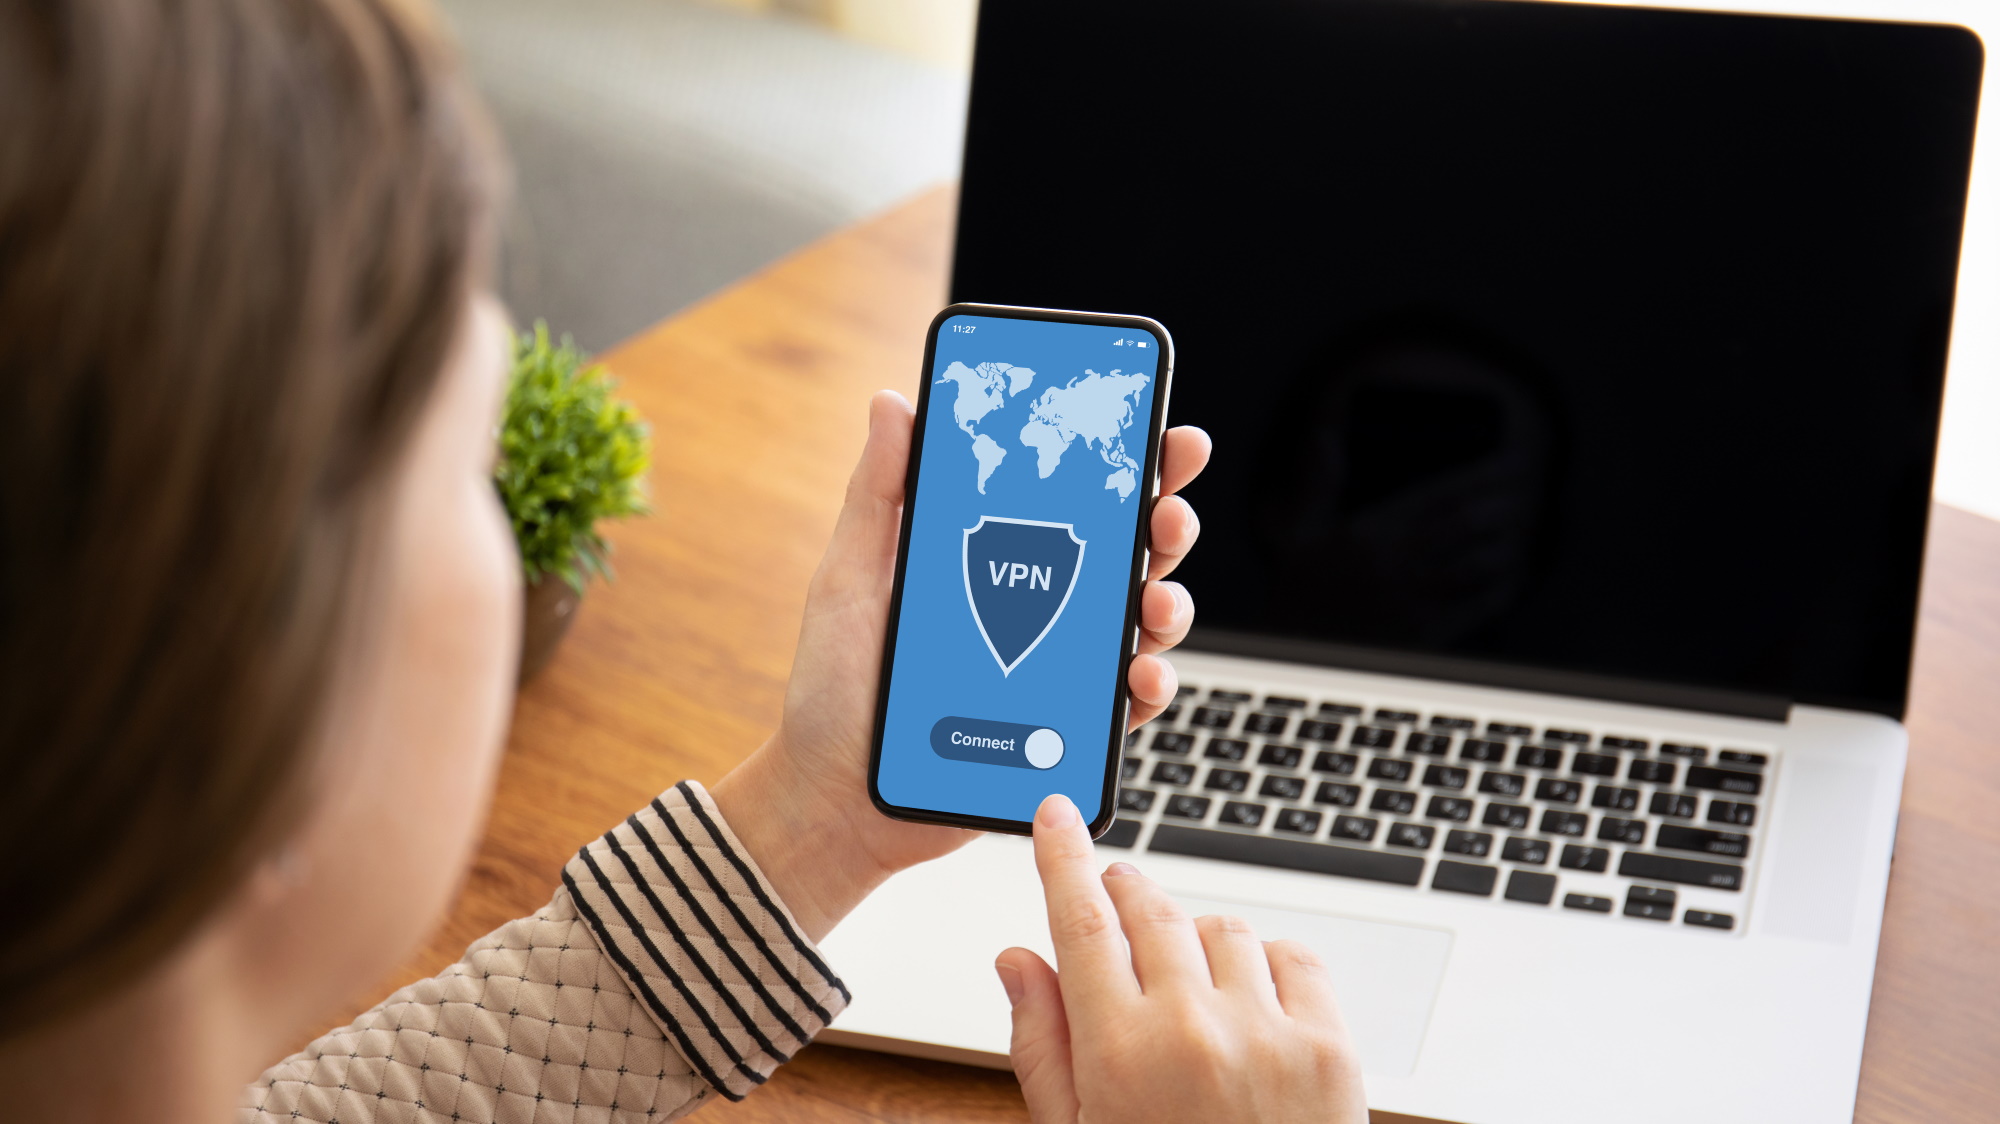 VPN vs. Proxy vs. Smart DNS: What's the Difference?